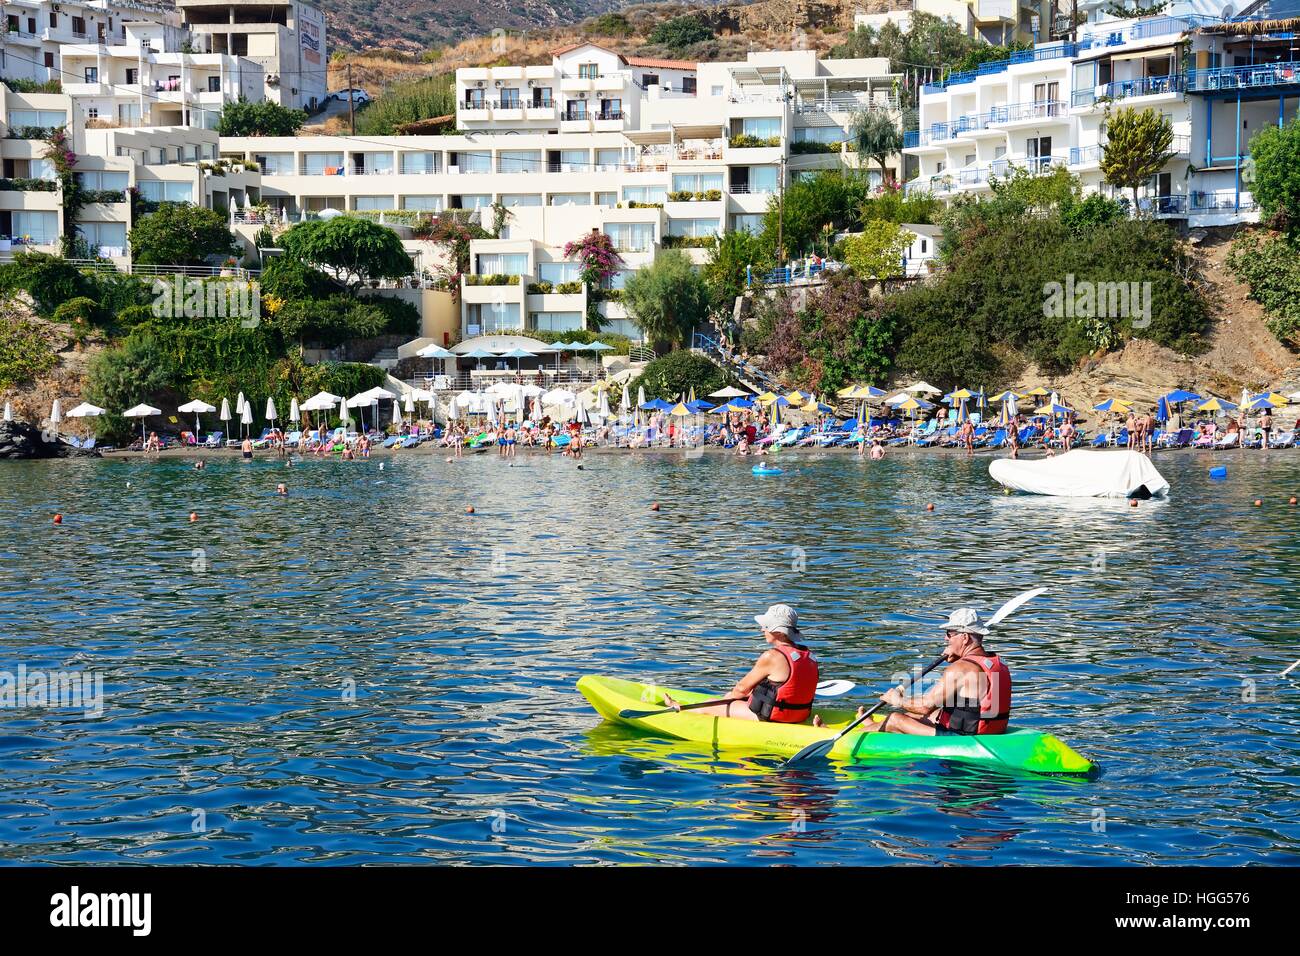 A couple canoeing in the harbour with tourists relaxing on the beach to the rear, Bali, Crete, Greece, Europe. Stock Photo